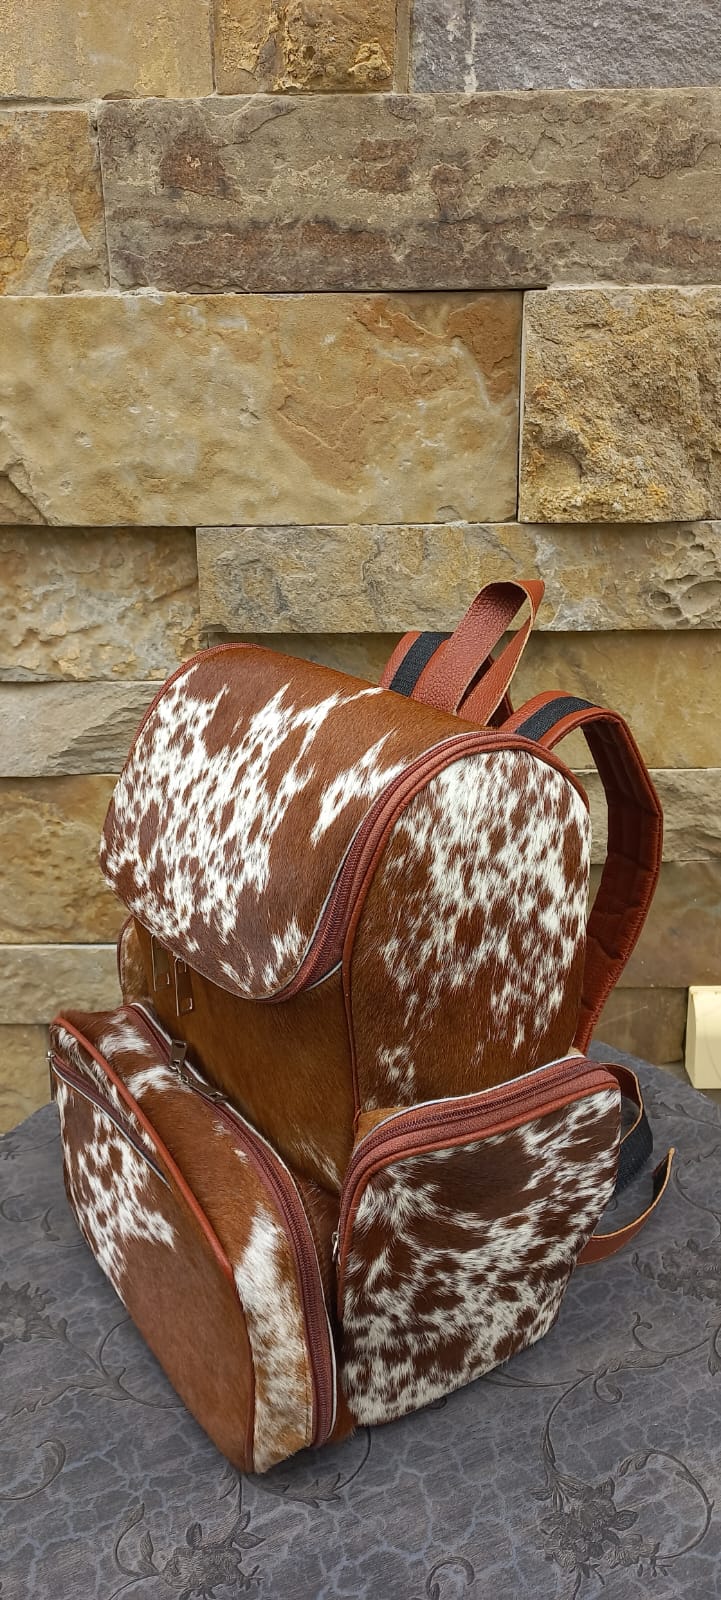 personalized diaper backpack laptop backpack travel backpack bag travel backpack bag cowhide handbag leather backpack baby bag backpack tan color bag genuine leather bag women laptop bag men's backpack